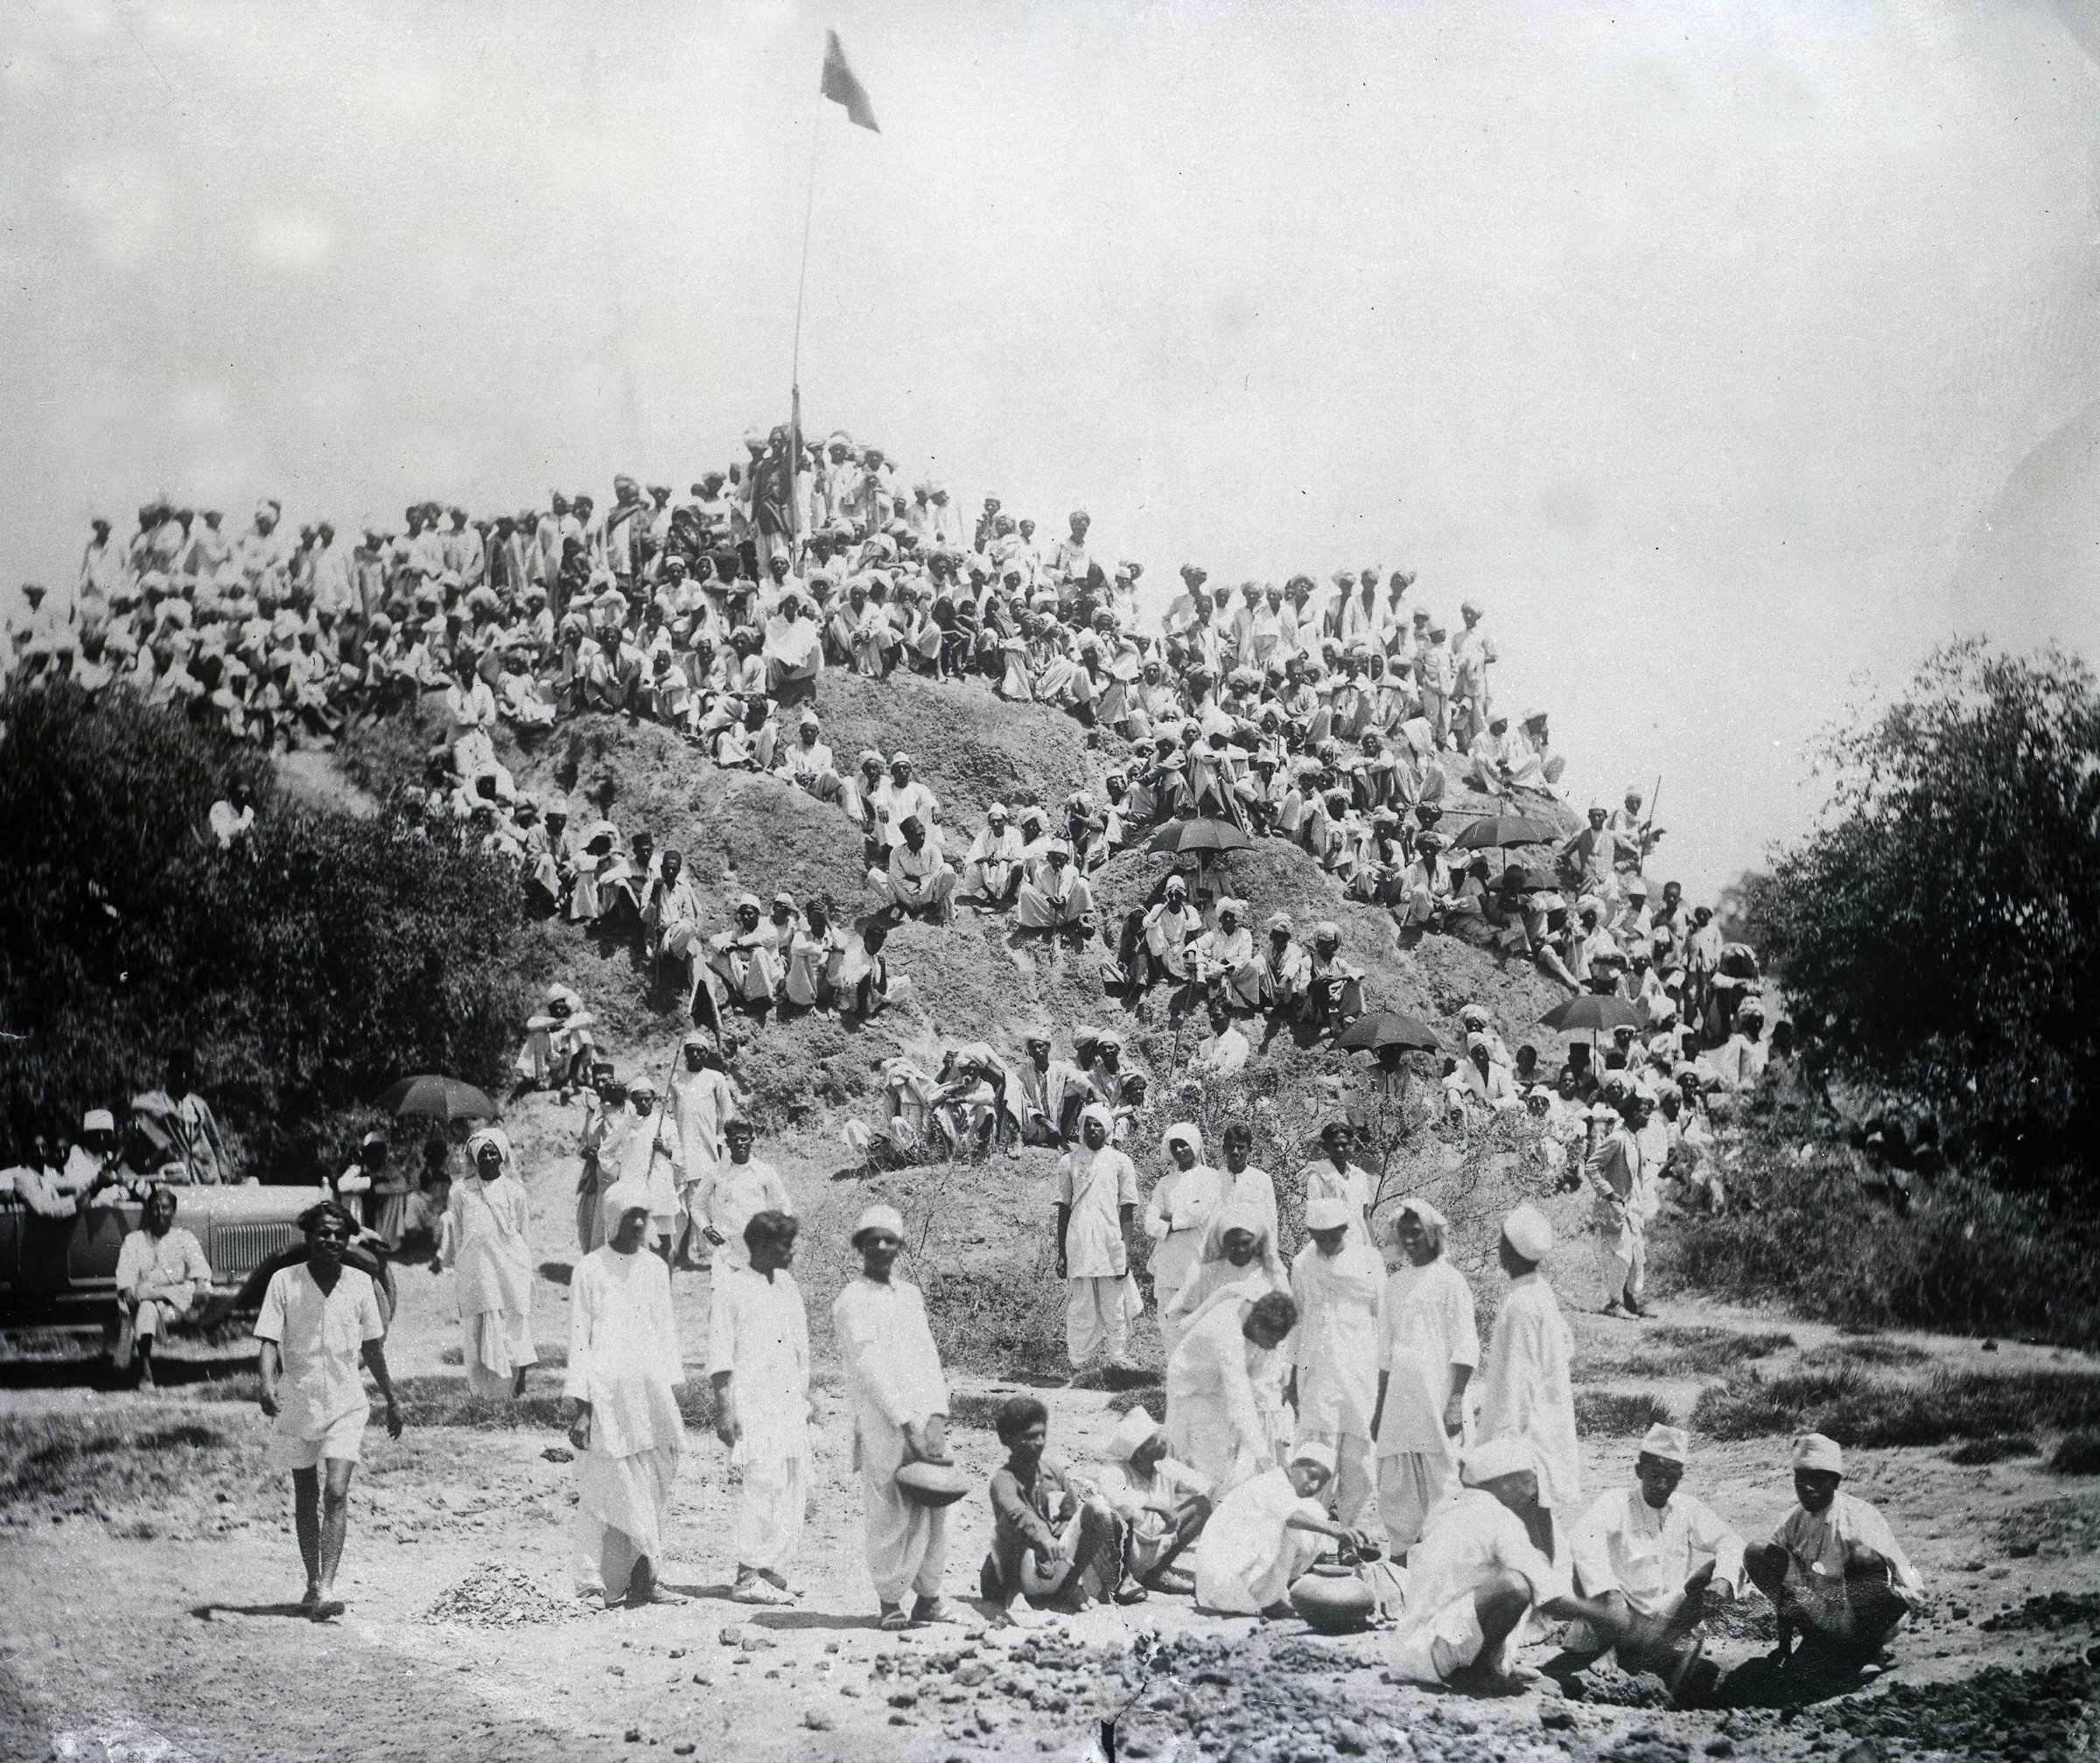 Kapadwamj, India, 6th May, 1930, Gandhi volunteers in camp at Kapadwanj watching members of their band making salt following the civil disobedience riots and demonstrations demanding the boycotting of British goods and the arrest of leader Mahatma Gandhi